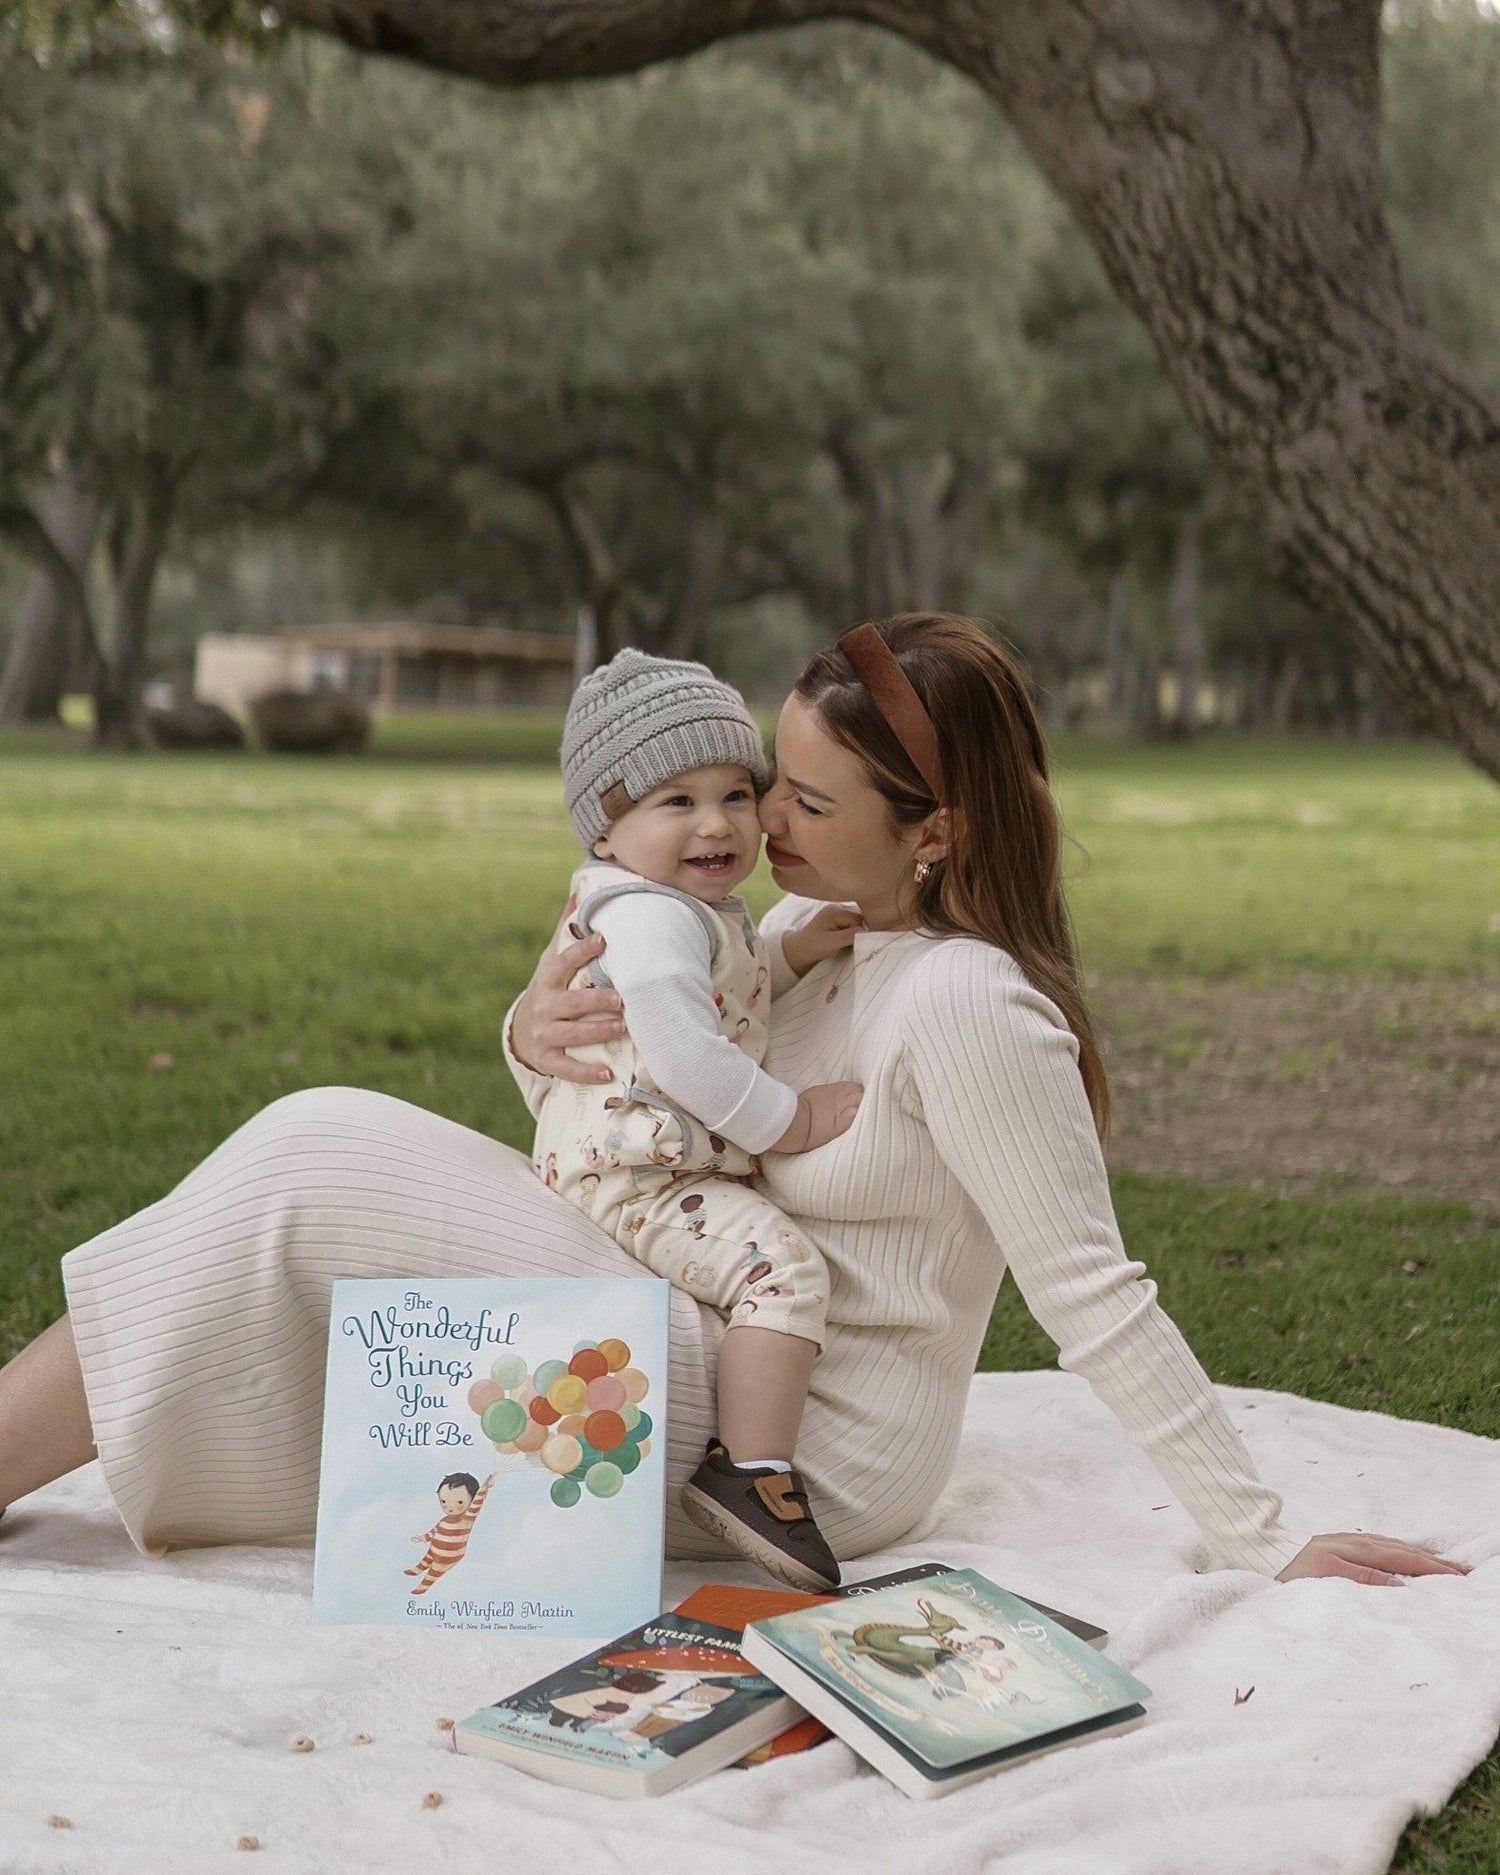 Woman with long dark hair and baby with a gray hat sitting on a blanket with storybooks in a park.